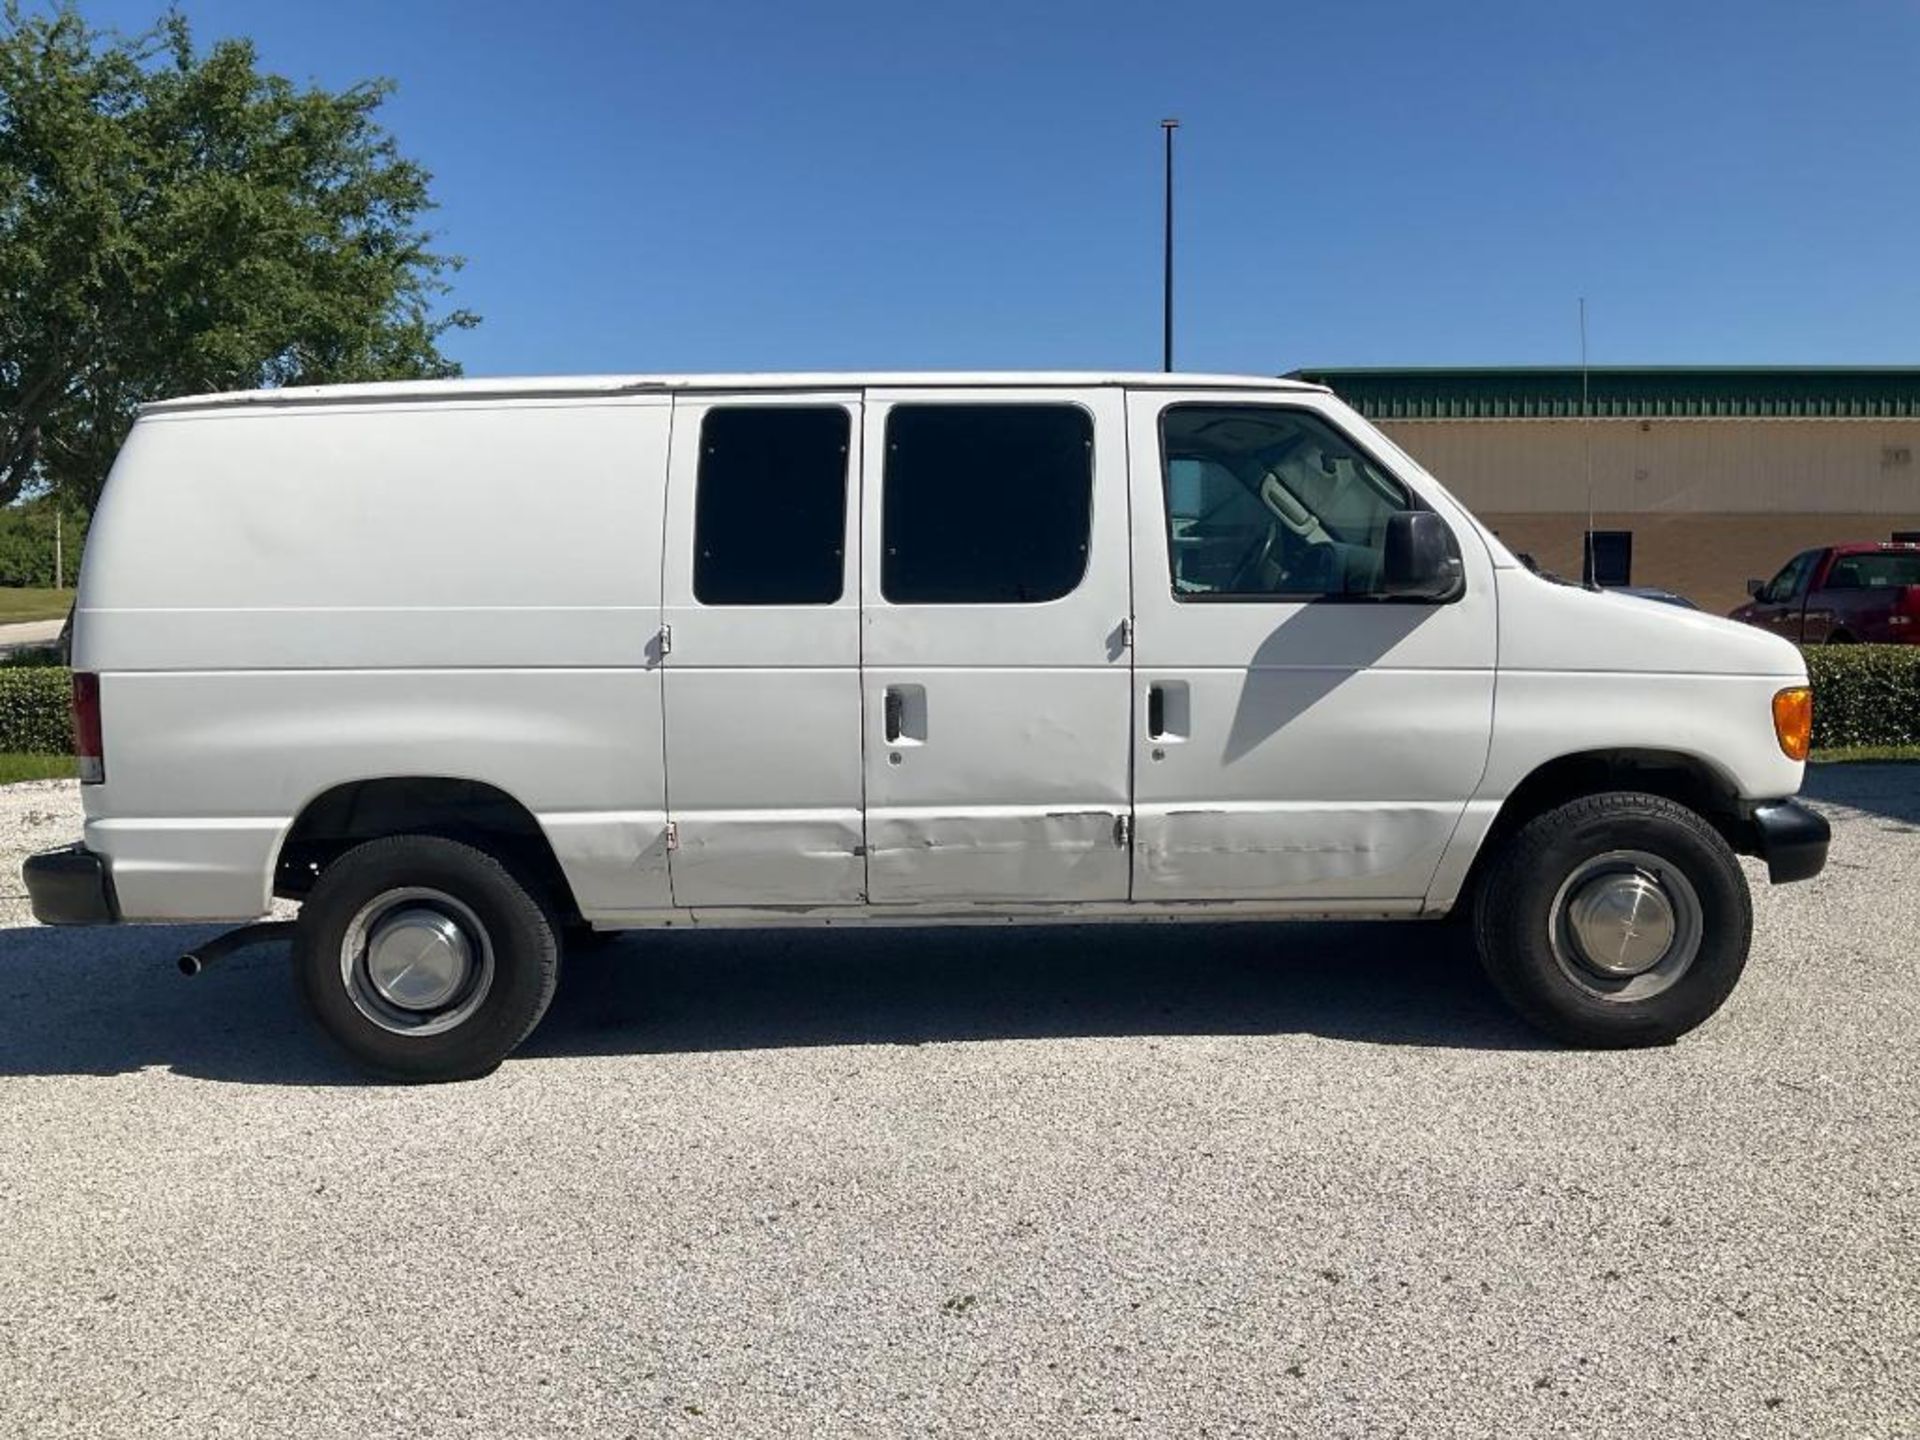 2003 FORD E-SERIES CARGO VAN, APPROX GVWR 8600LBS, STORAGE UNIT & SHELVES IN BACK , RUNS & DRIVES - Image 11 of 28